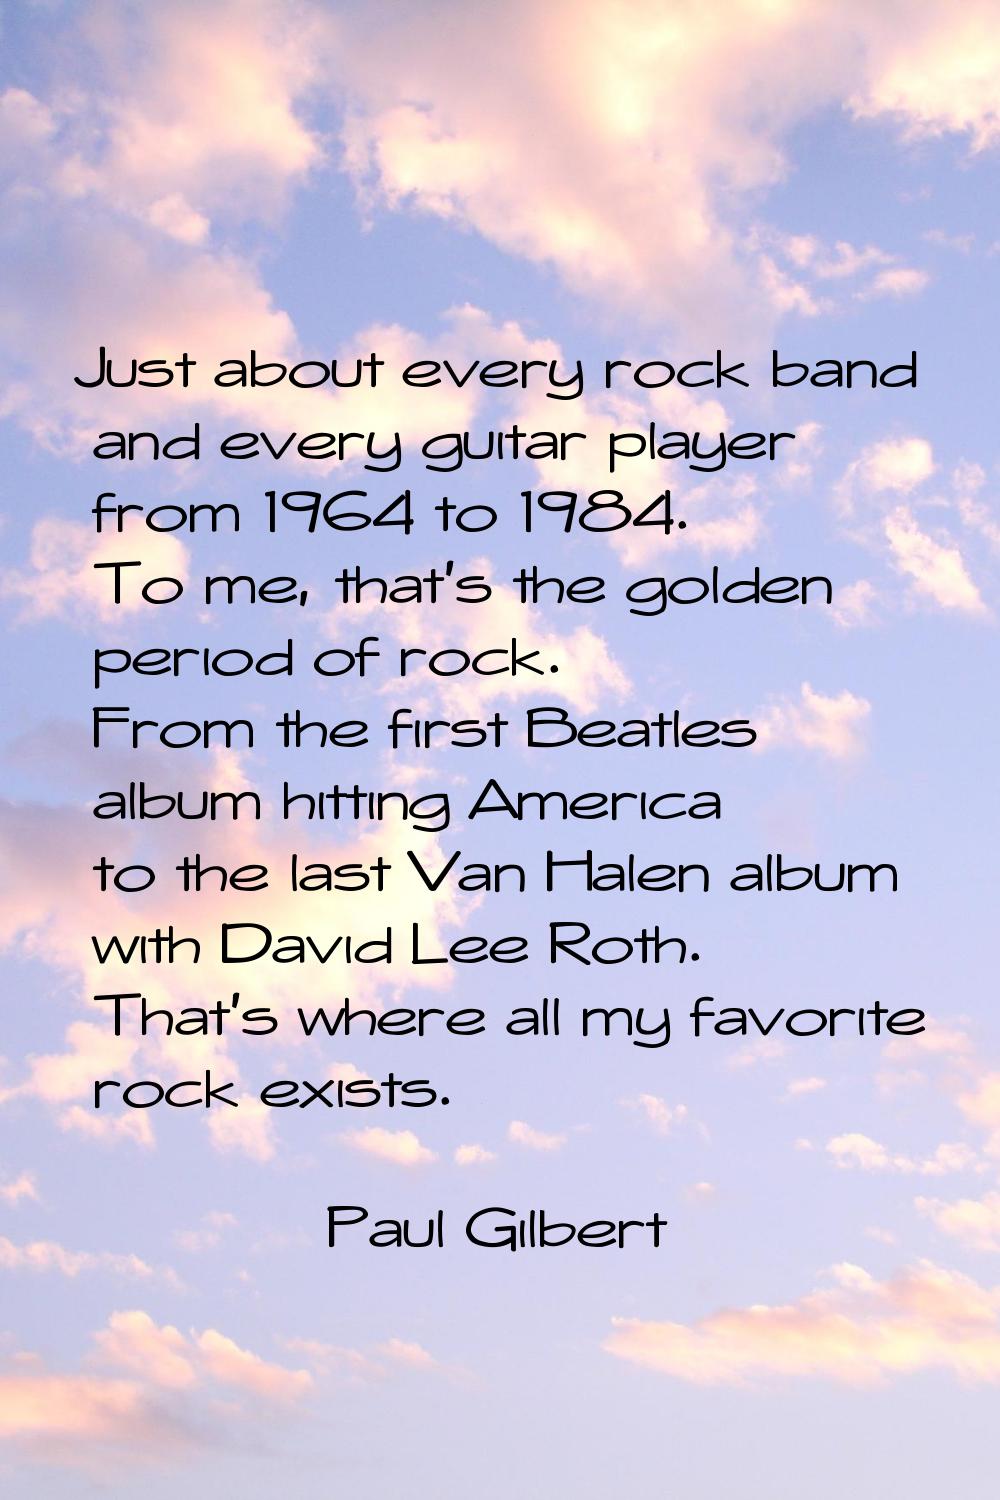 Just about every rock band and every guitar player from 1964 to 1984. To me, that's the golden peri